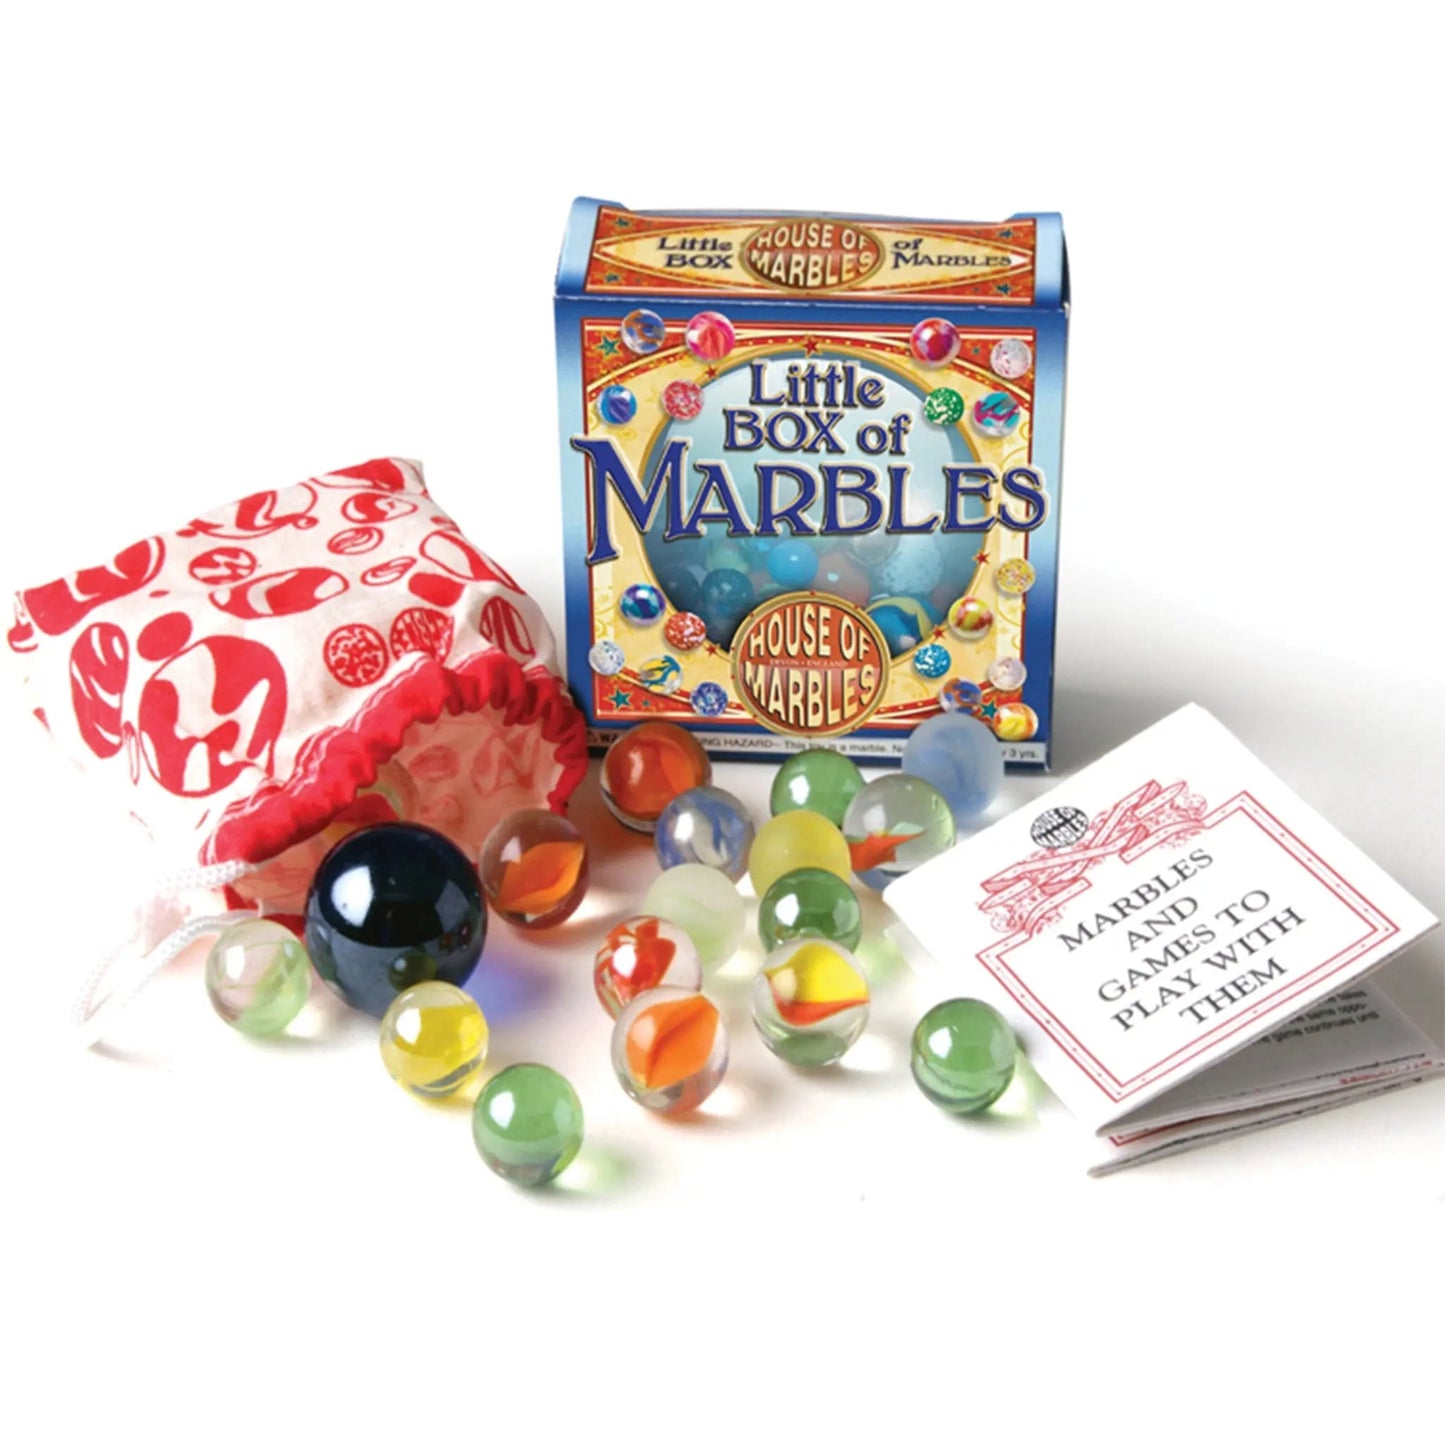 Little Box of Marbles - House of Marbles - The Forgotten Toy Shop